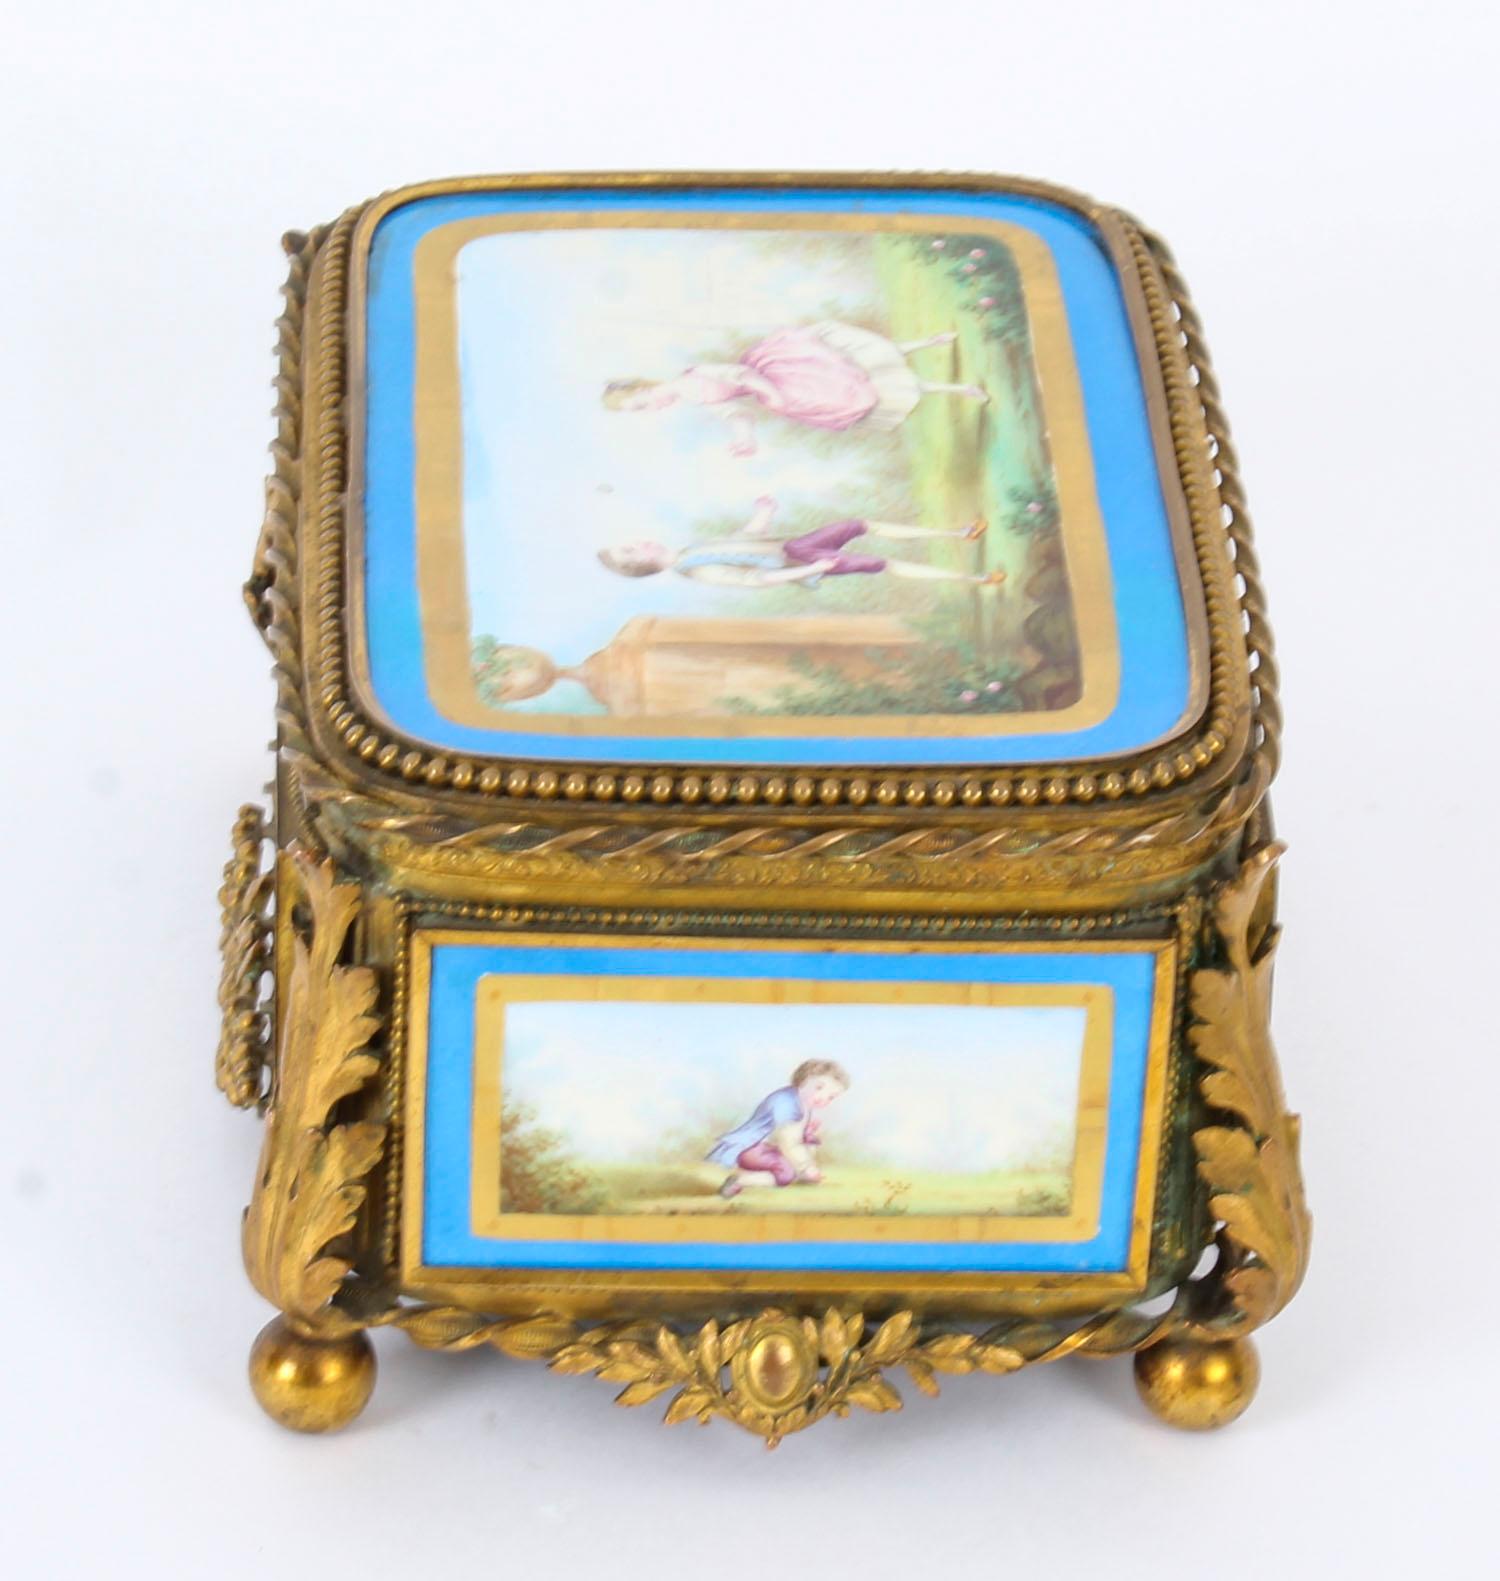 Antique French Sevres Porcelain and Ormolu Jewellery Casket 19th Century  For Sale 7